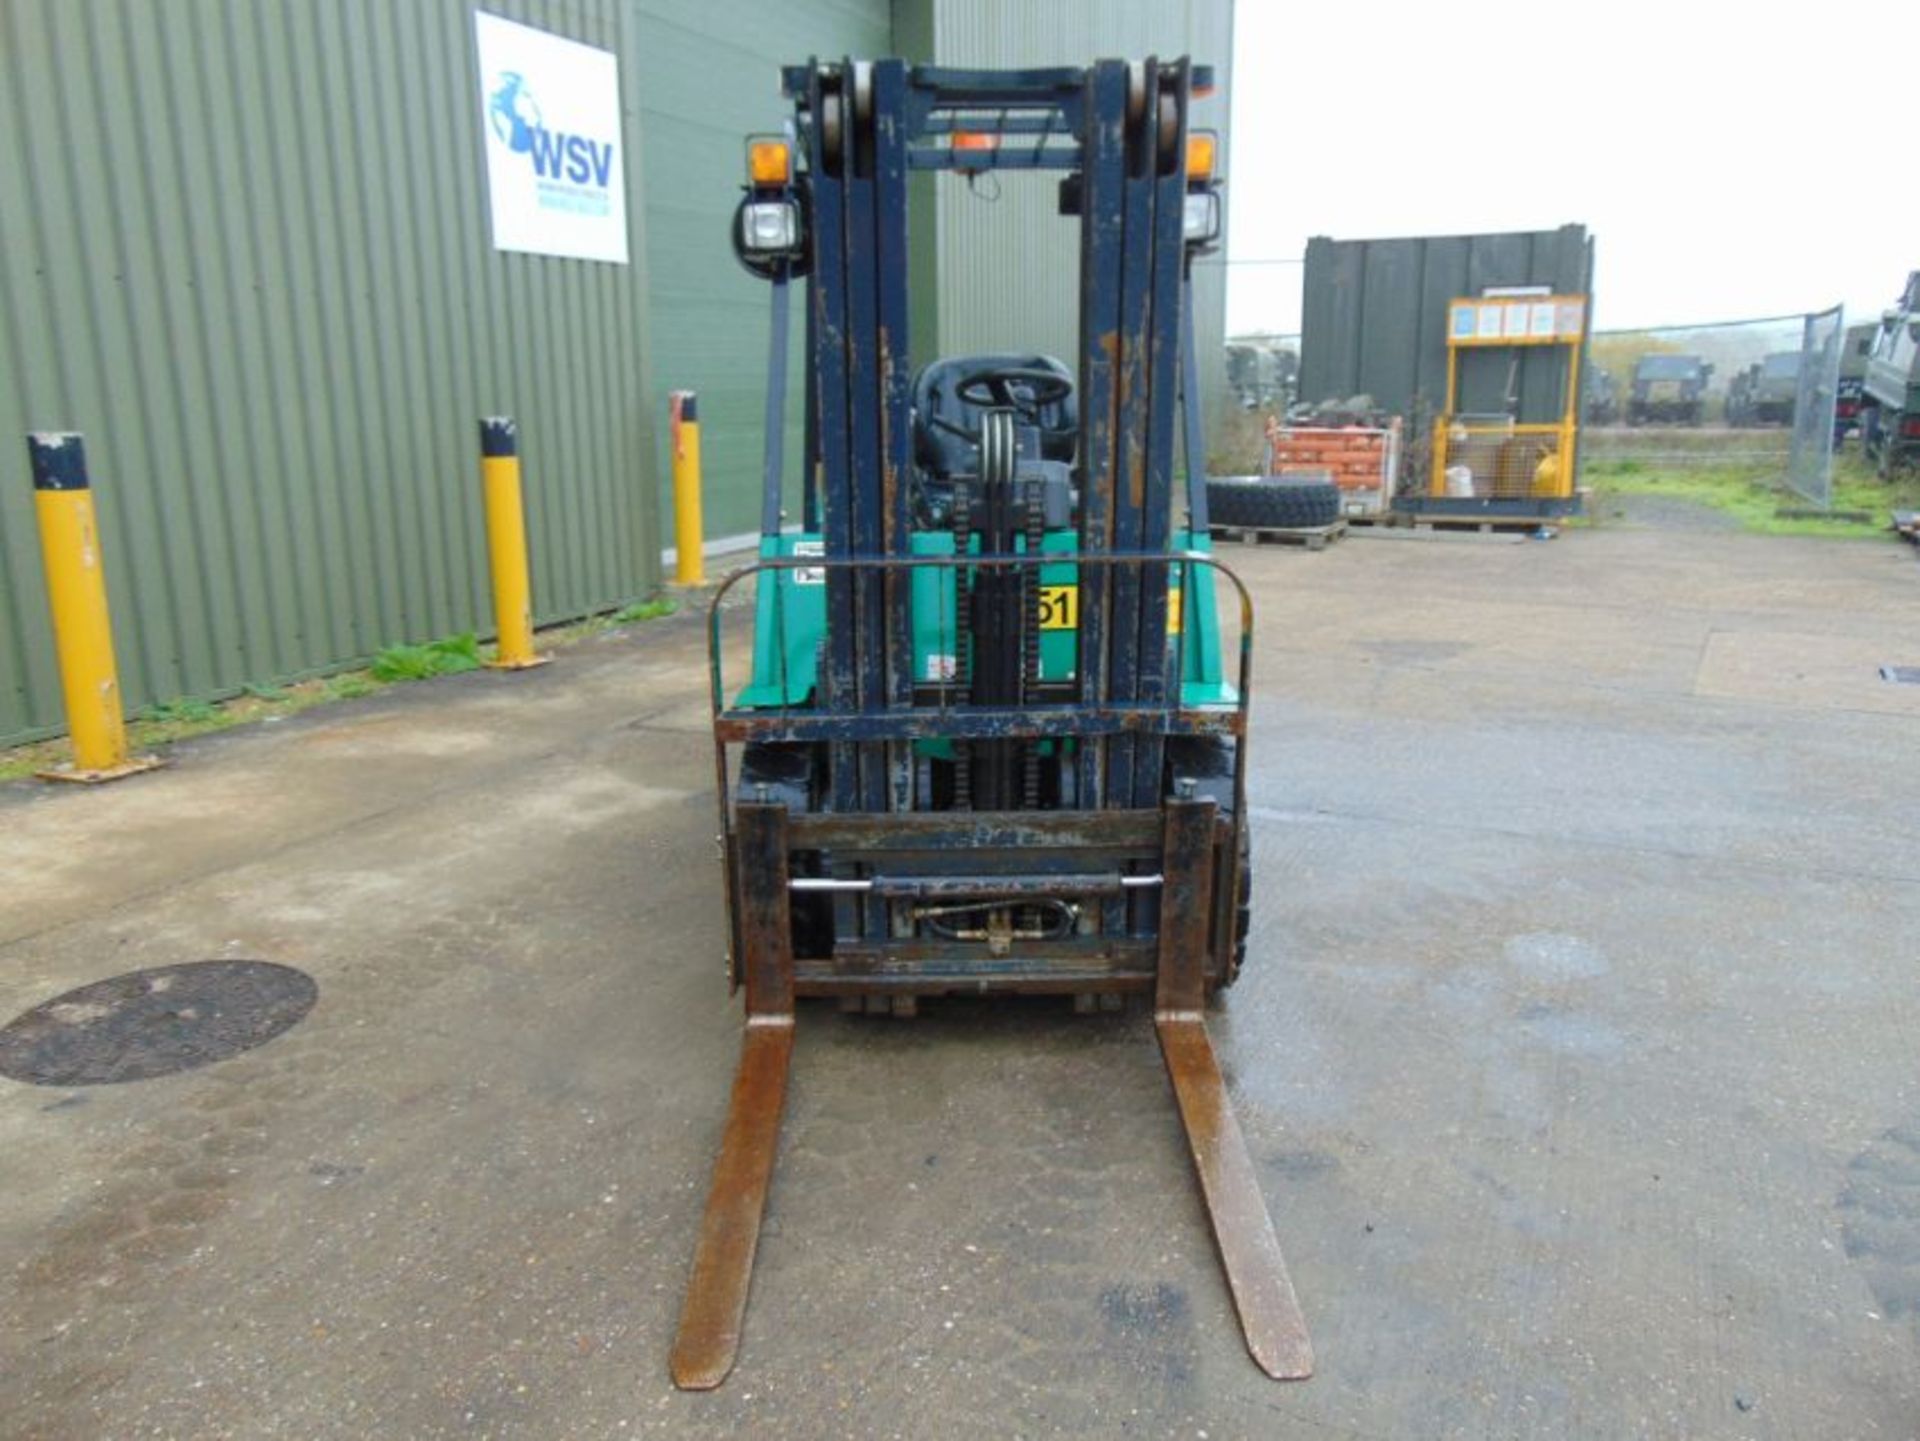 Maximal M25 2500Kg Diesel Fork Lift Truck ONLY 1,490 HOURS! - Image 3 of 22